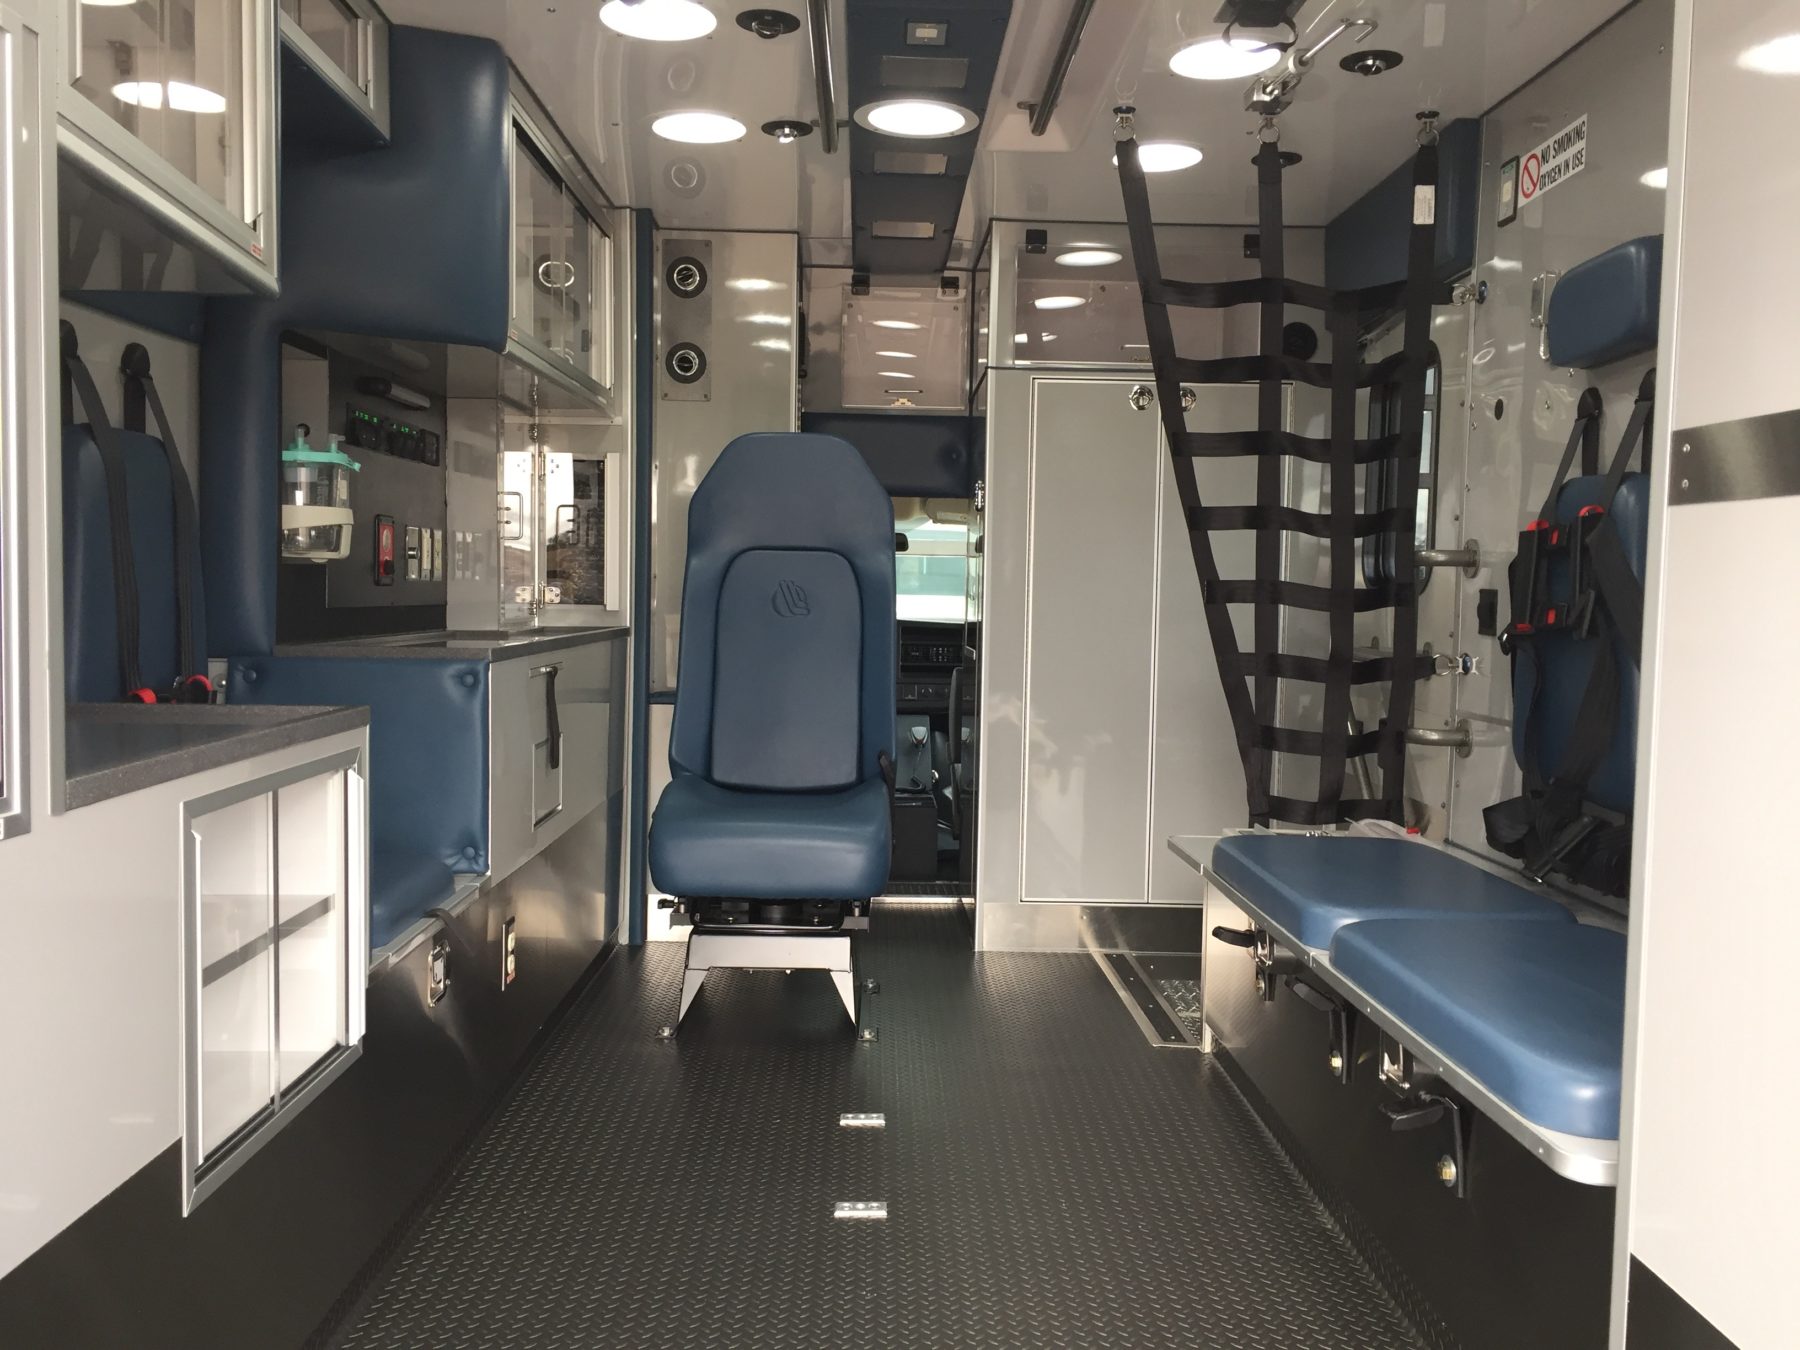 2018 Chevrolet G4500 Type 3 Ambulance For Sale – Picture 2